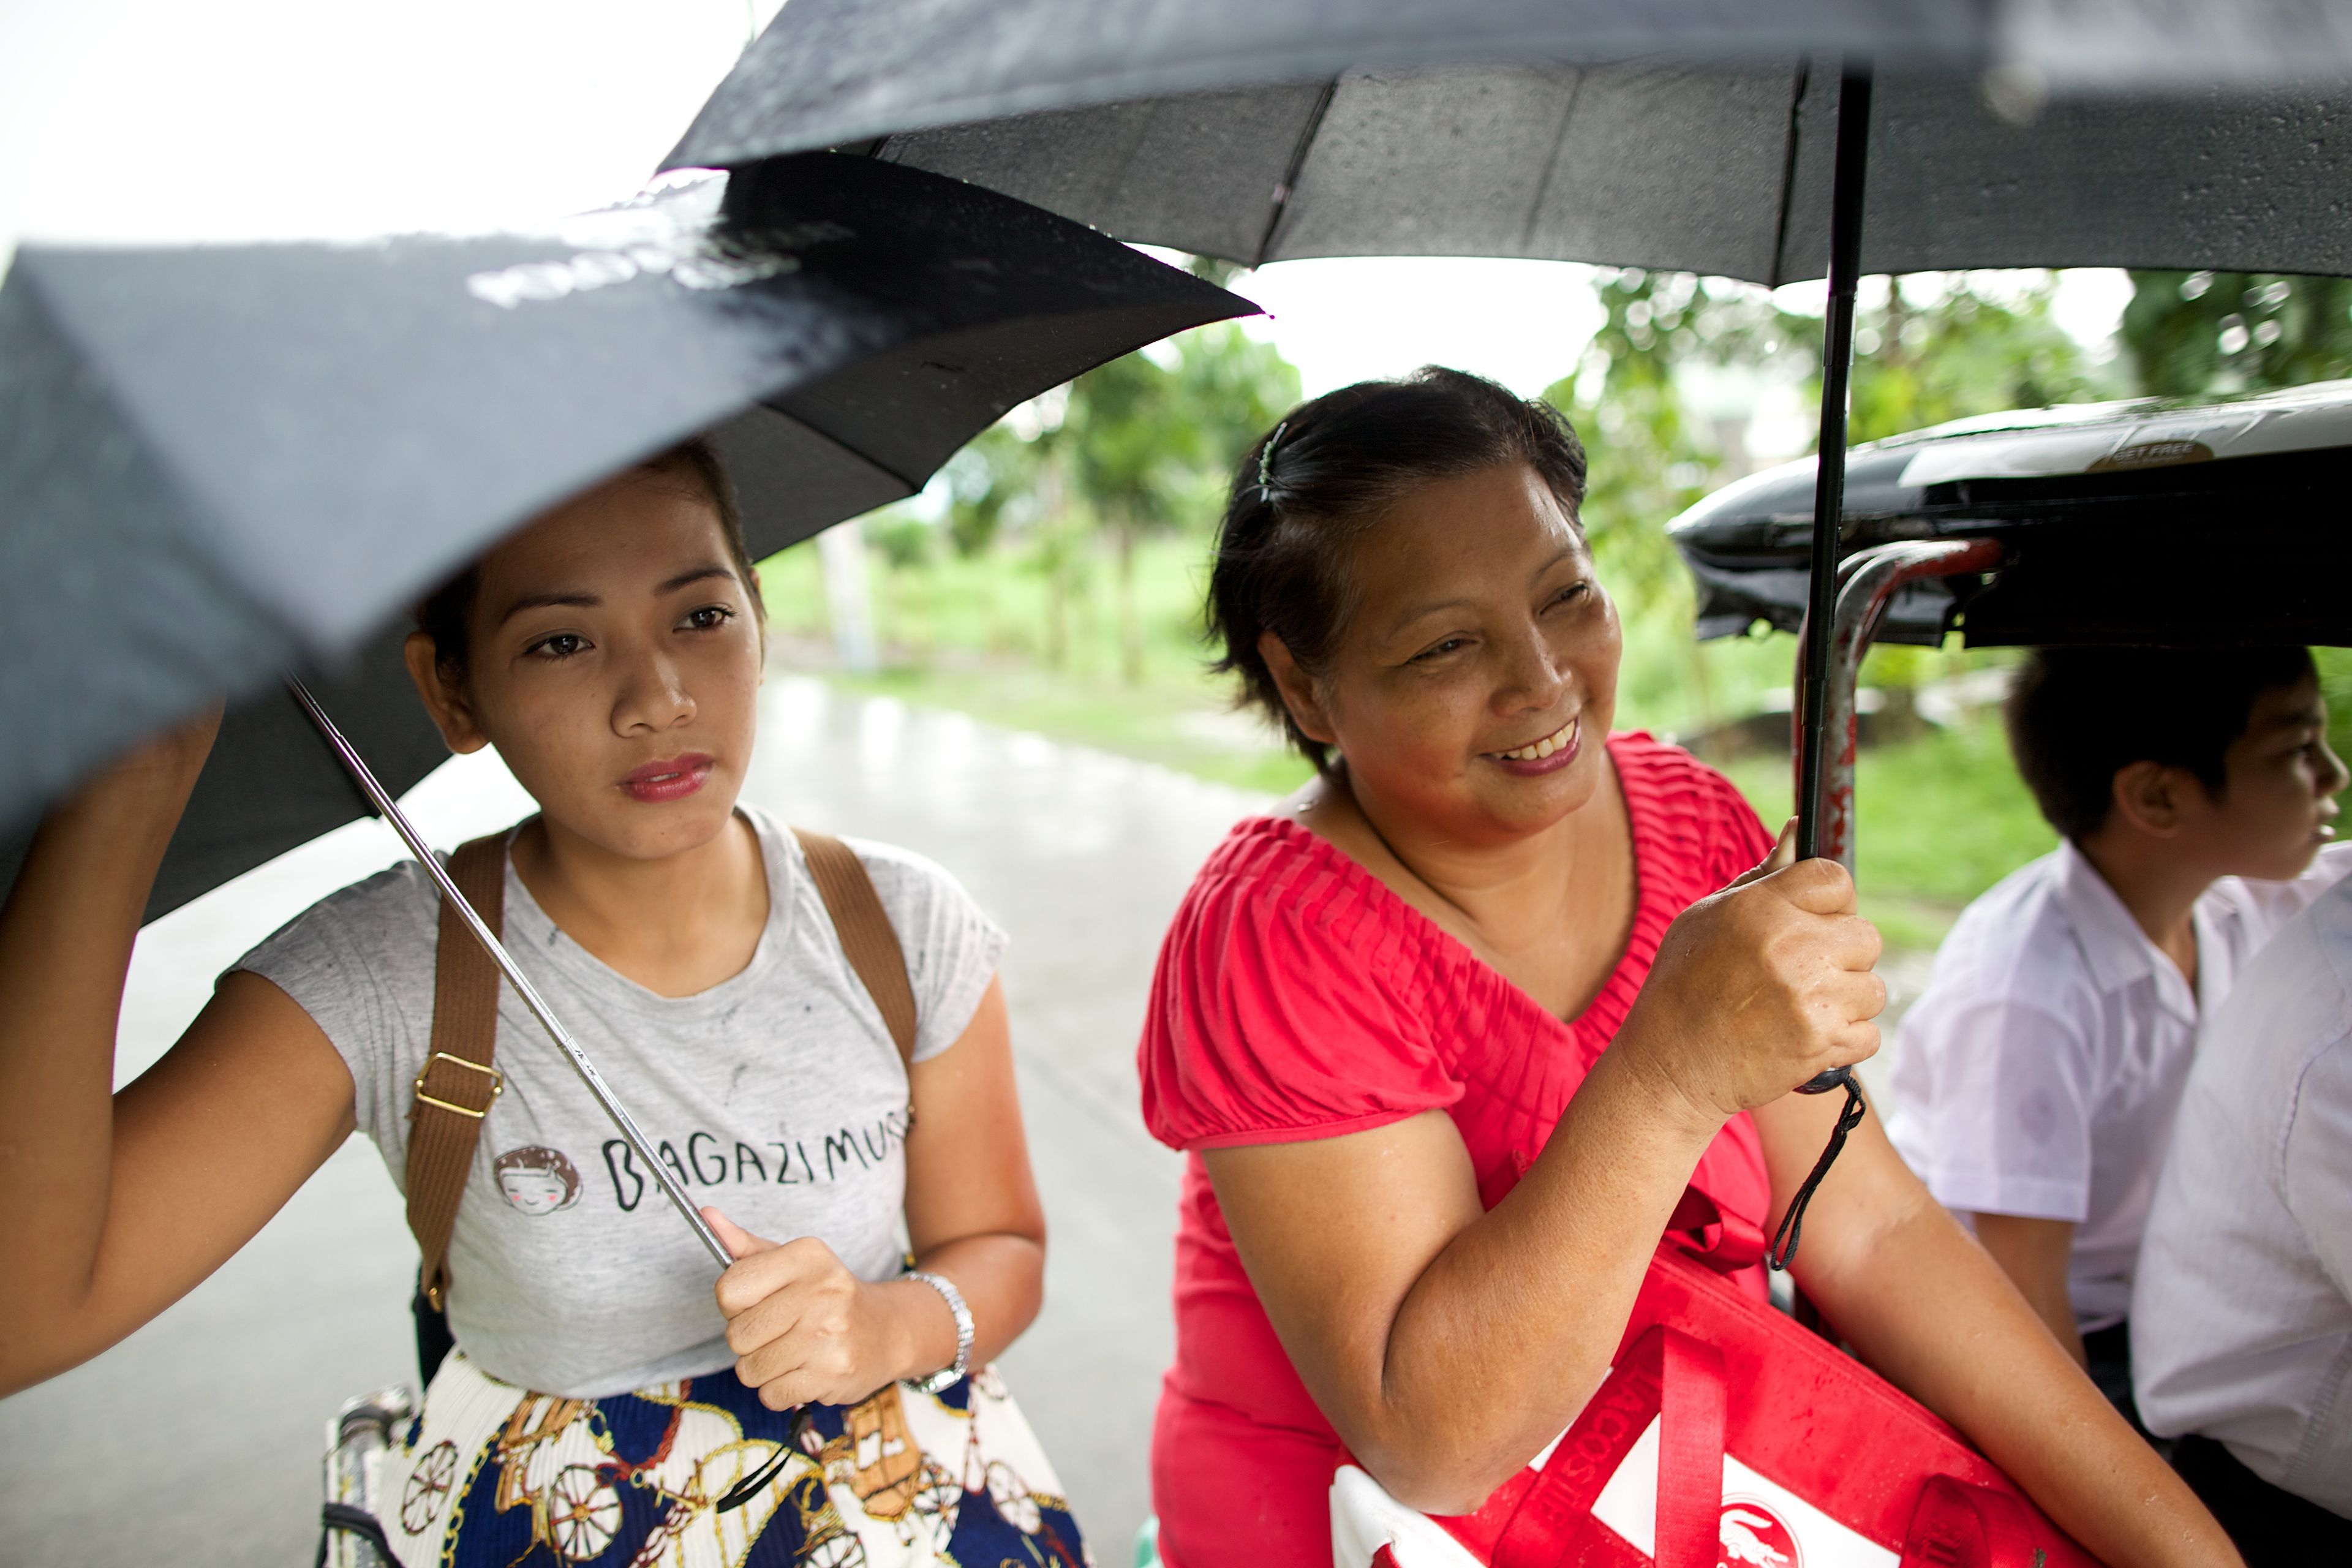 A mother and her daughter travel together on a rainy day.